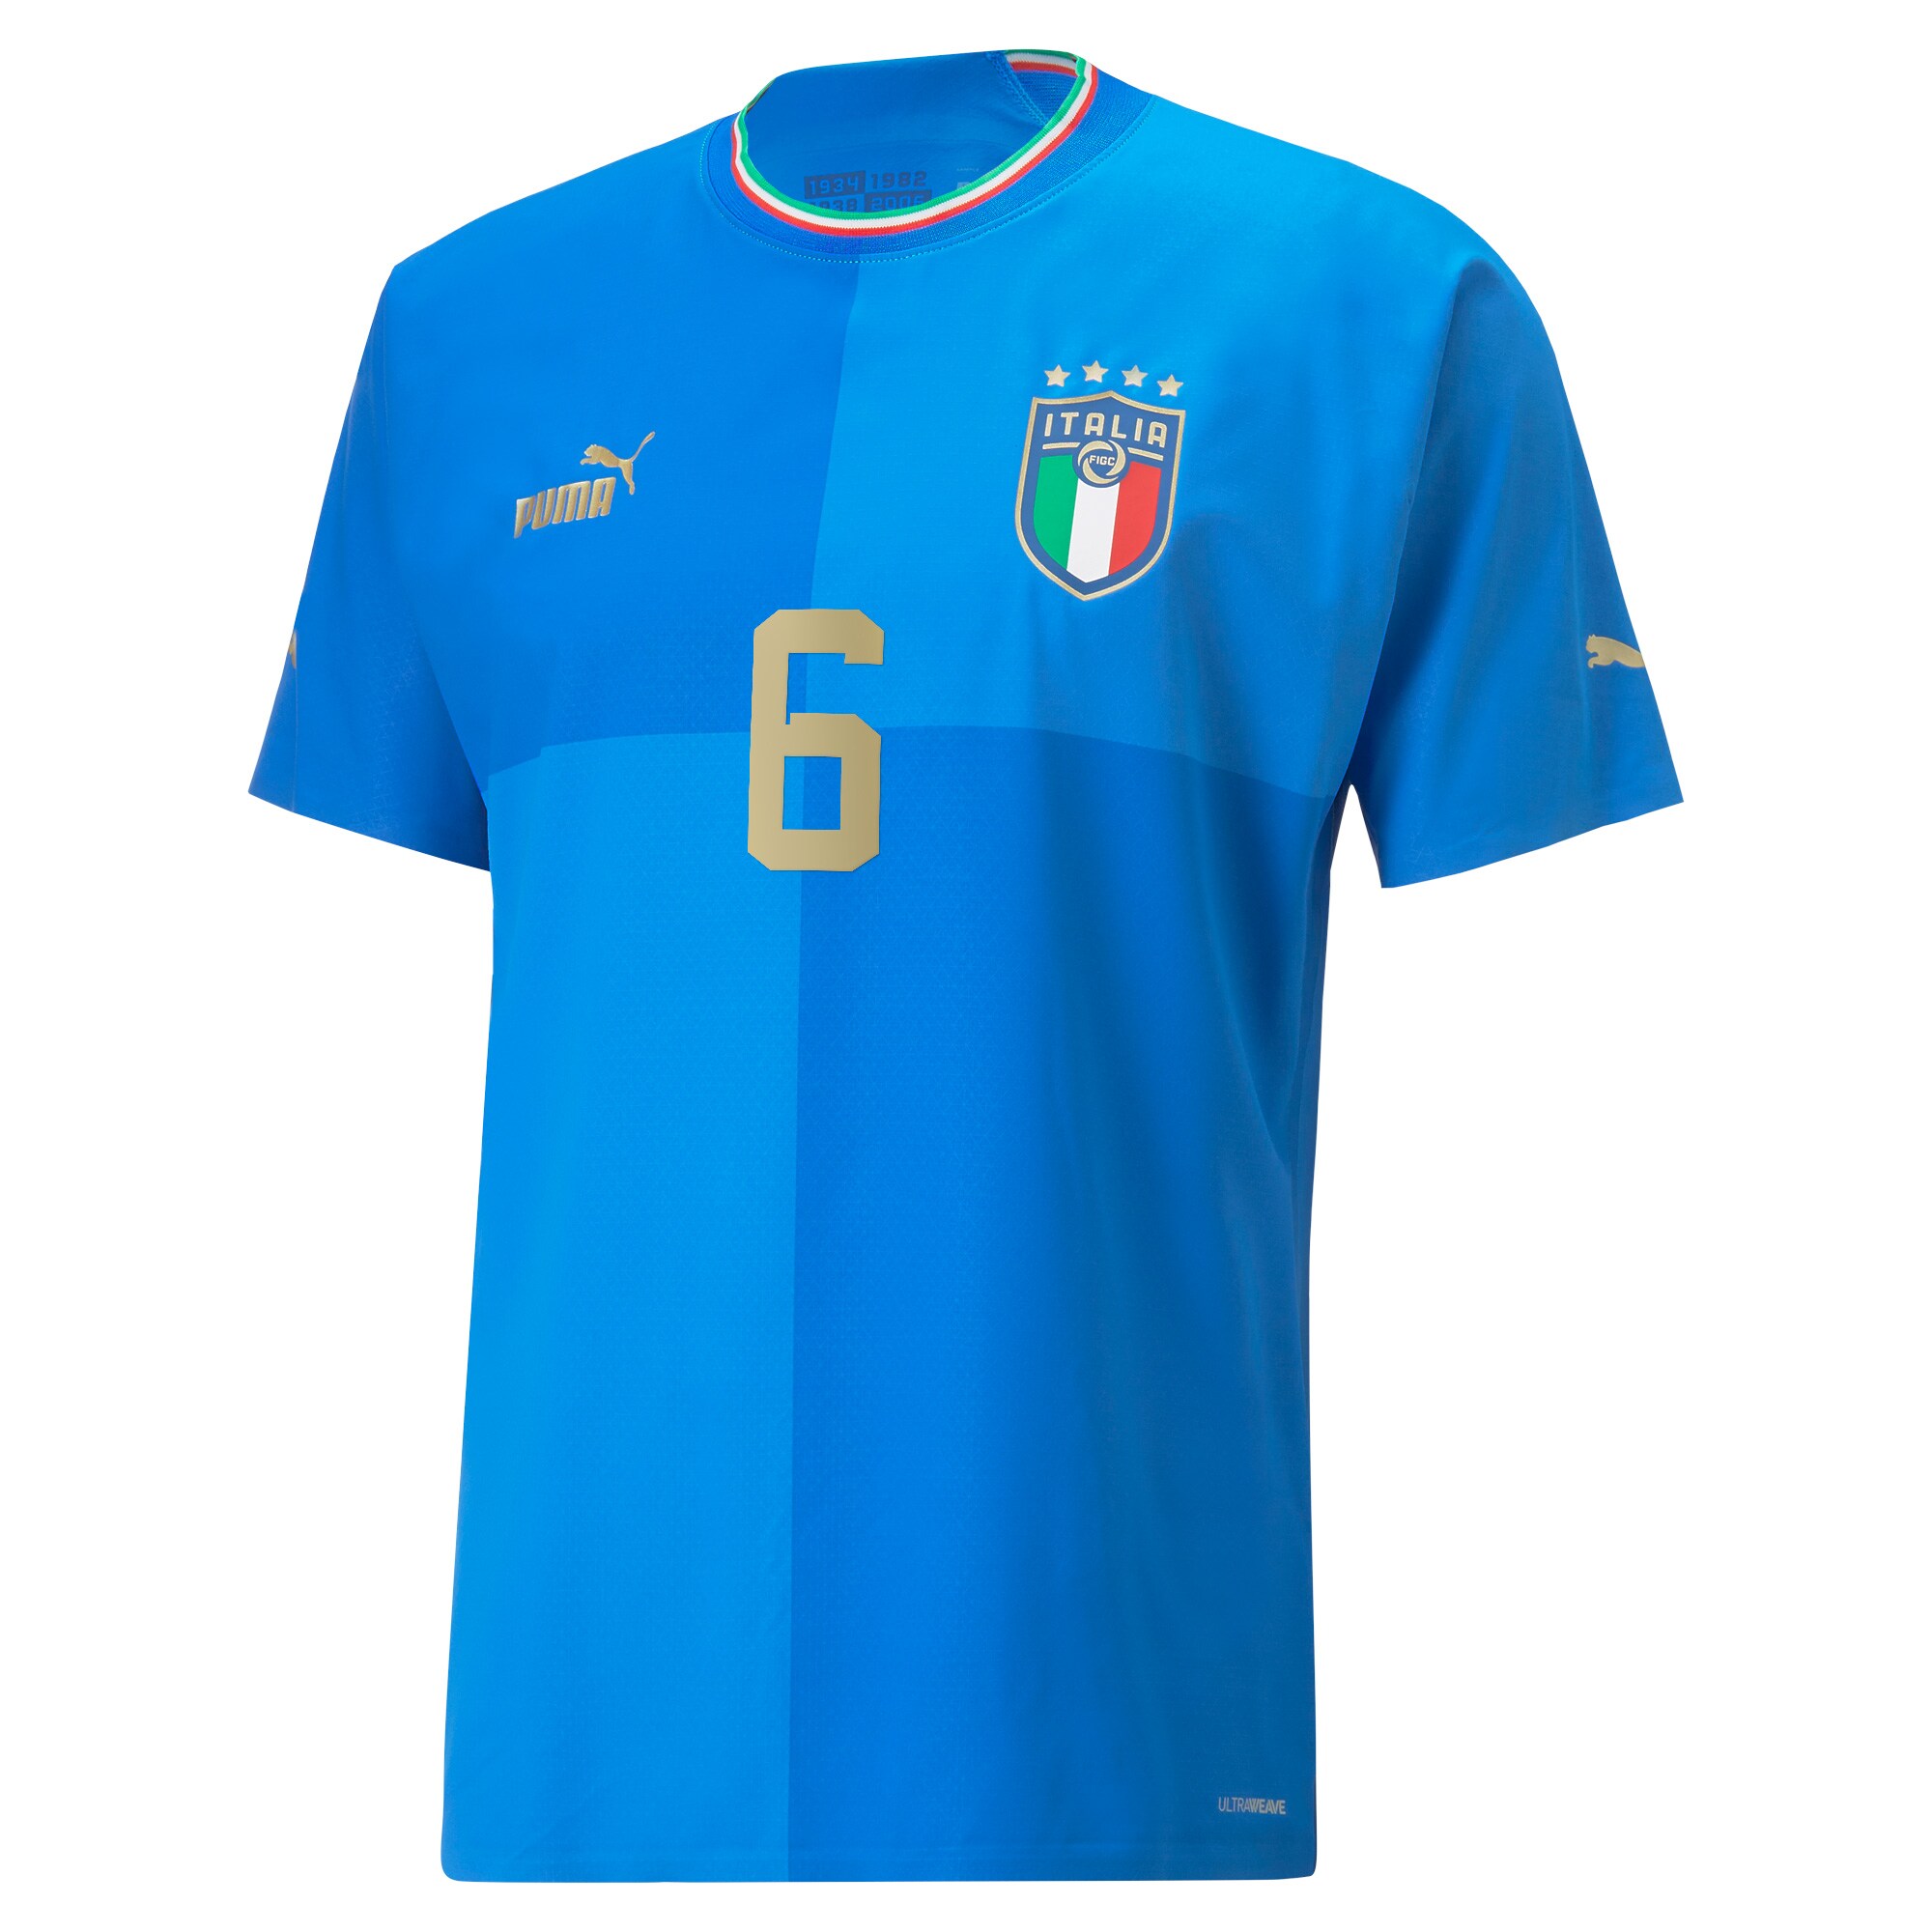 Marco Verratti Italy National Team 2022/23 Home Authentic Player Jersey